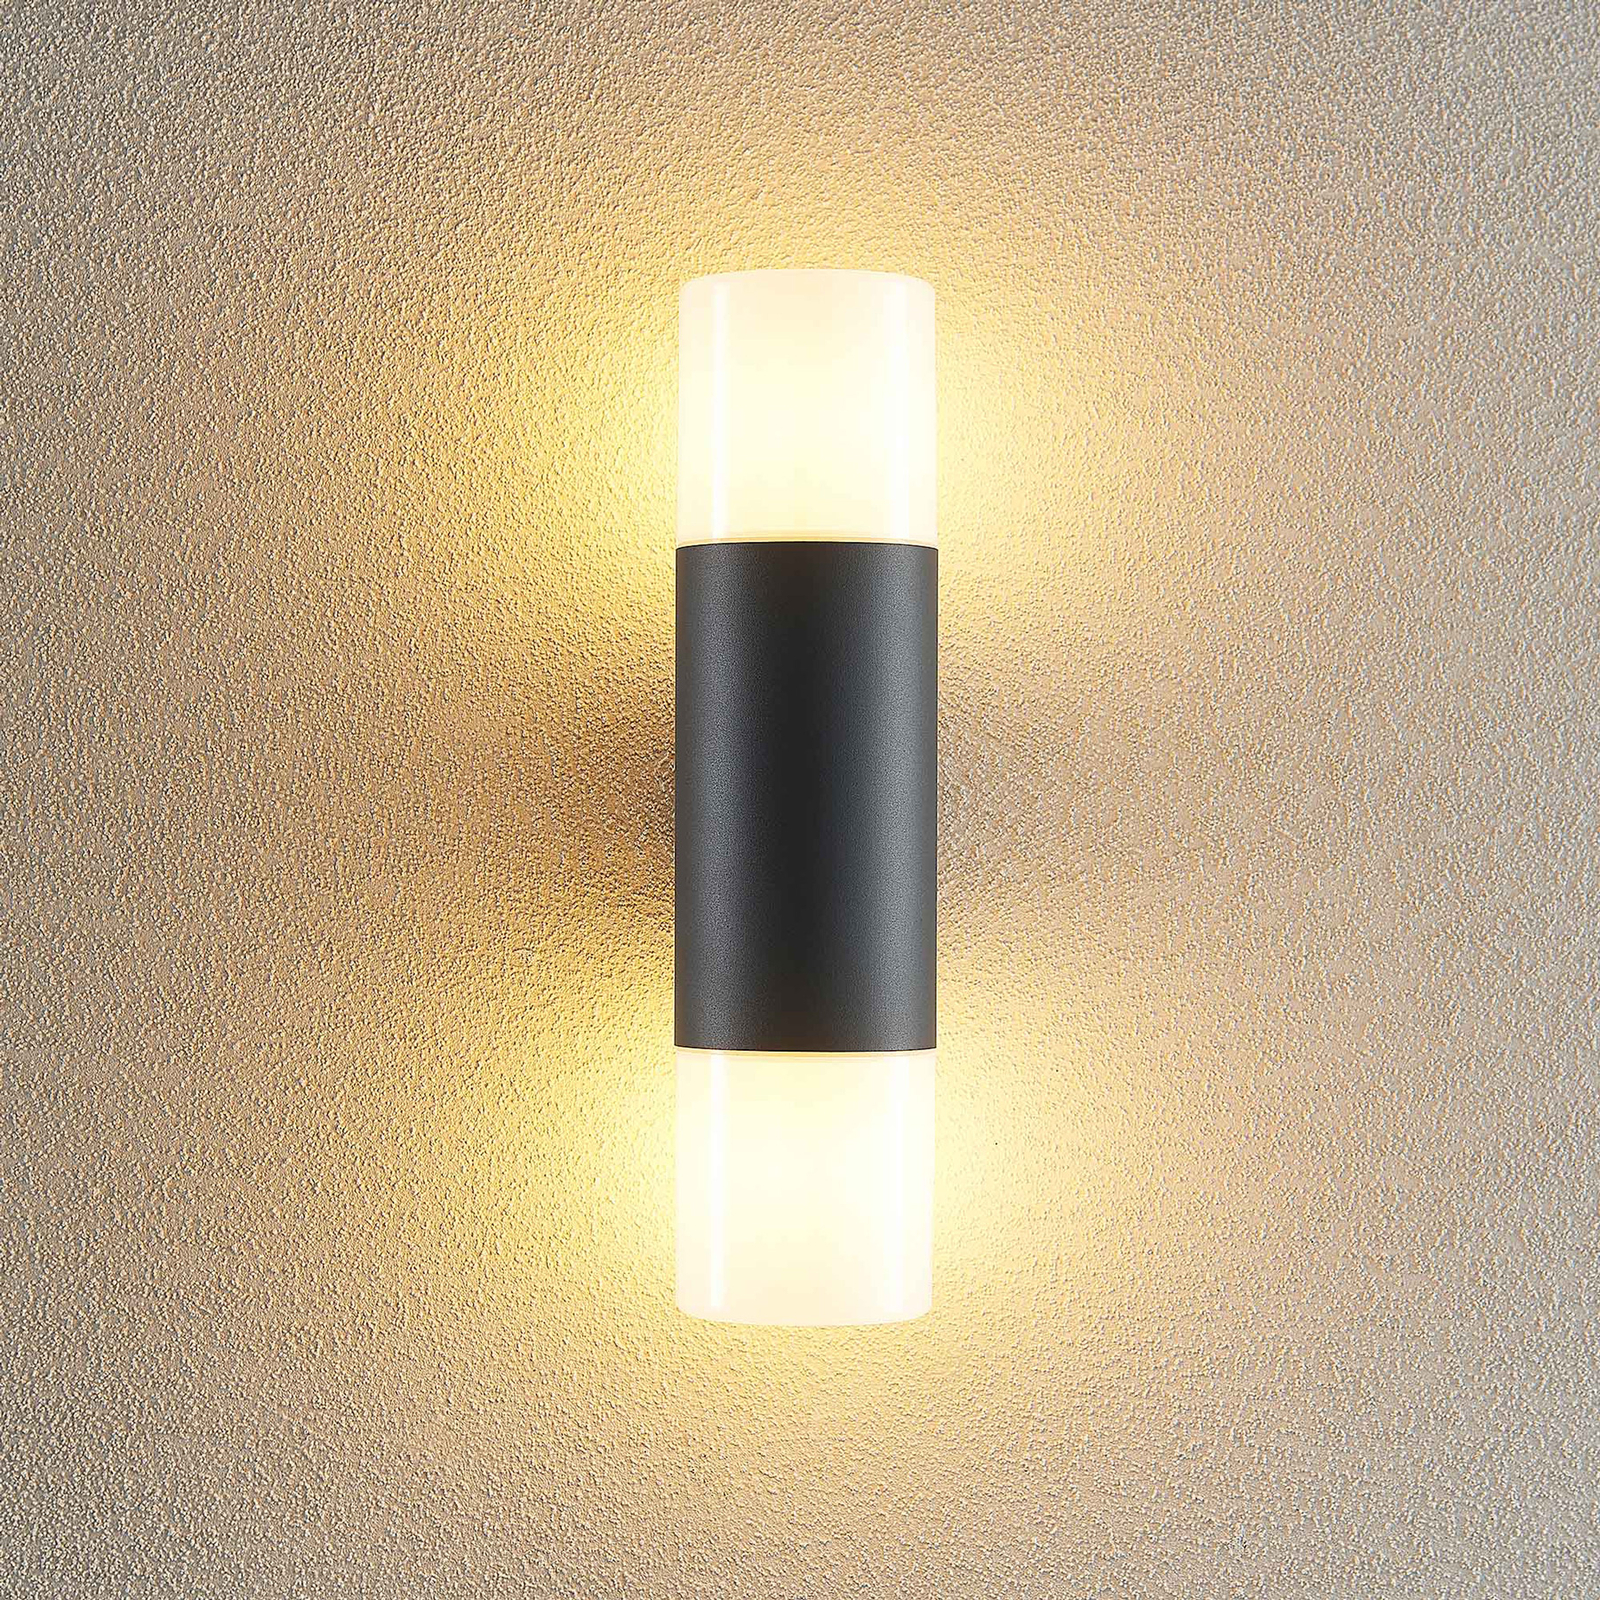 Lindby Tabyn outdoor wall light, two-bulb